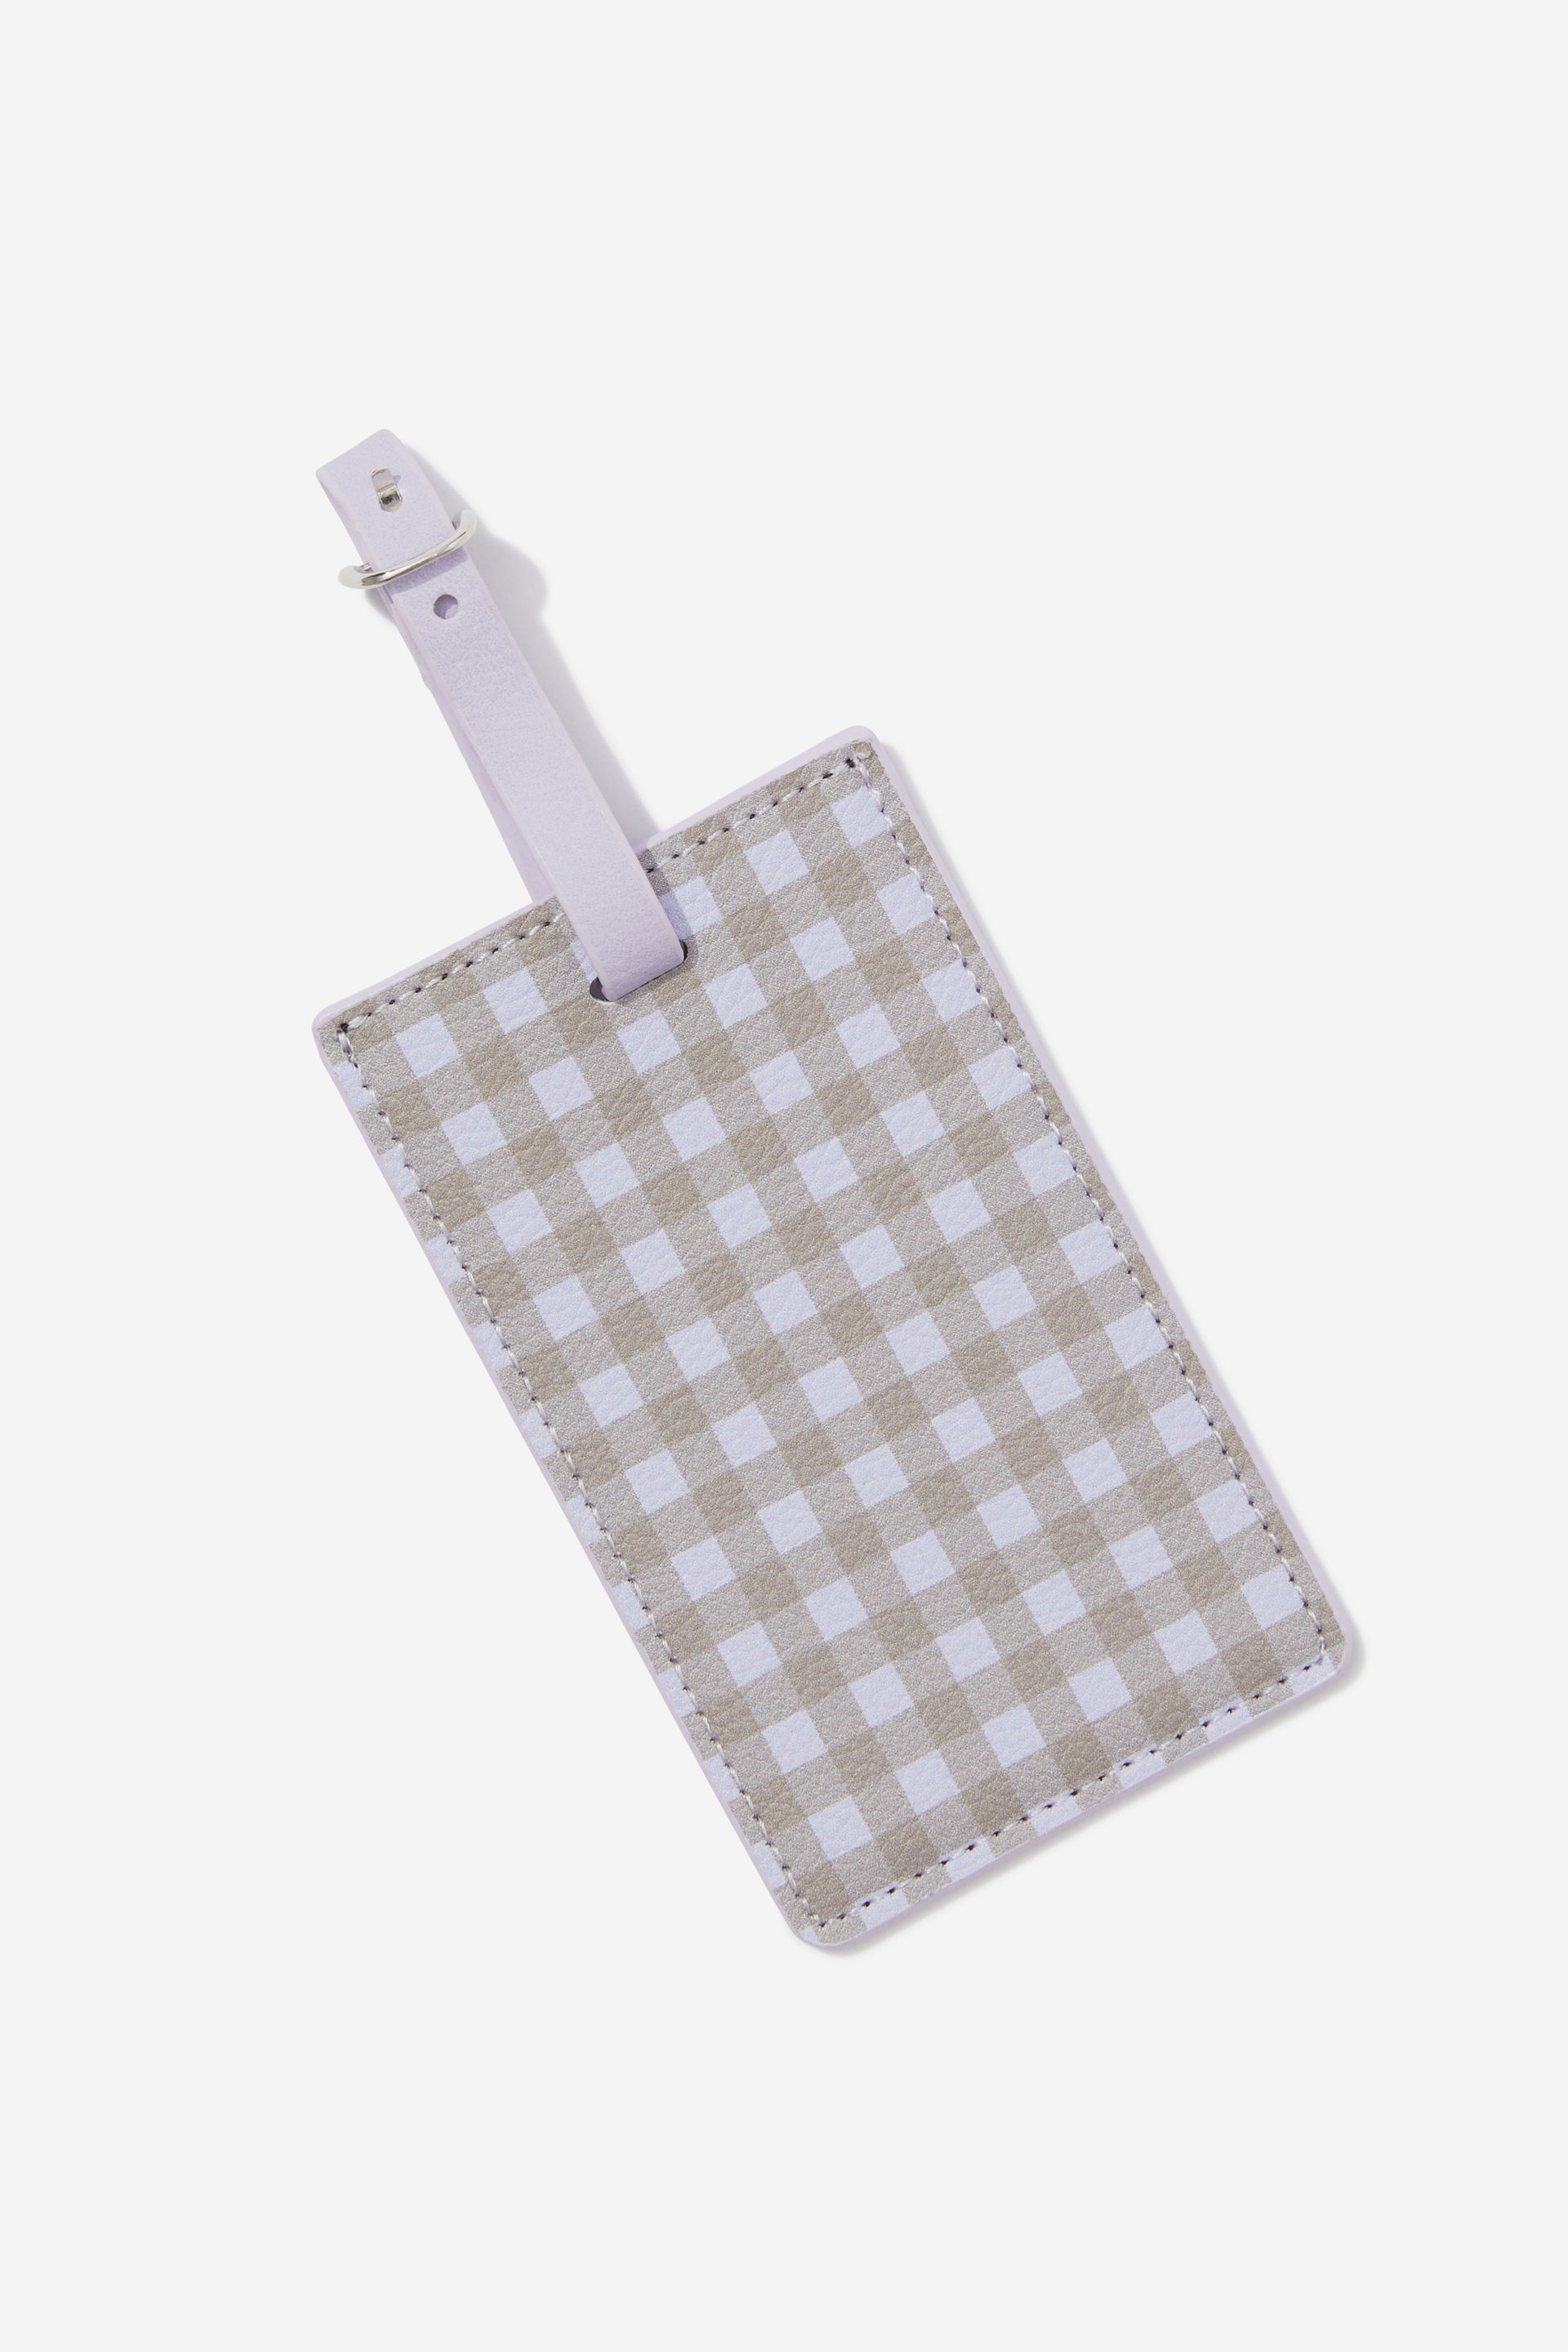 Typo - Off The Grid Luggage Tag - Gingham/ soft lilac